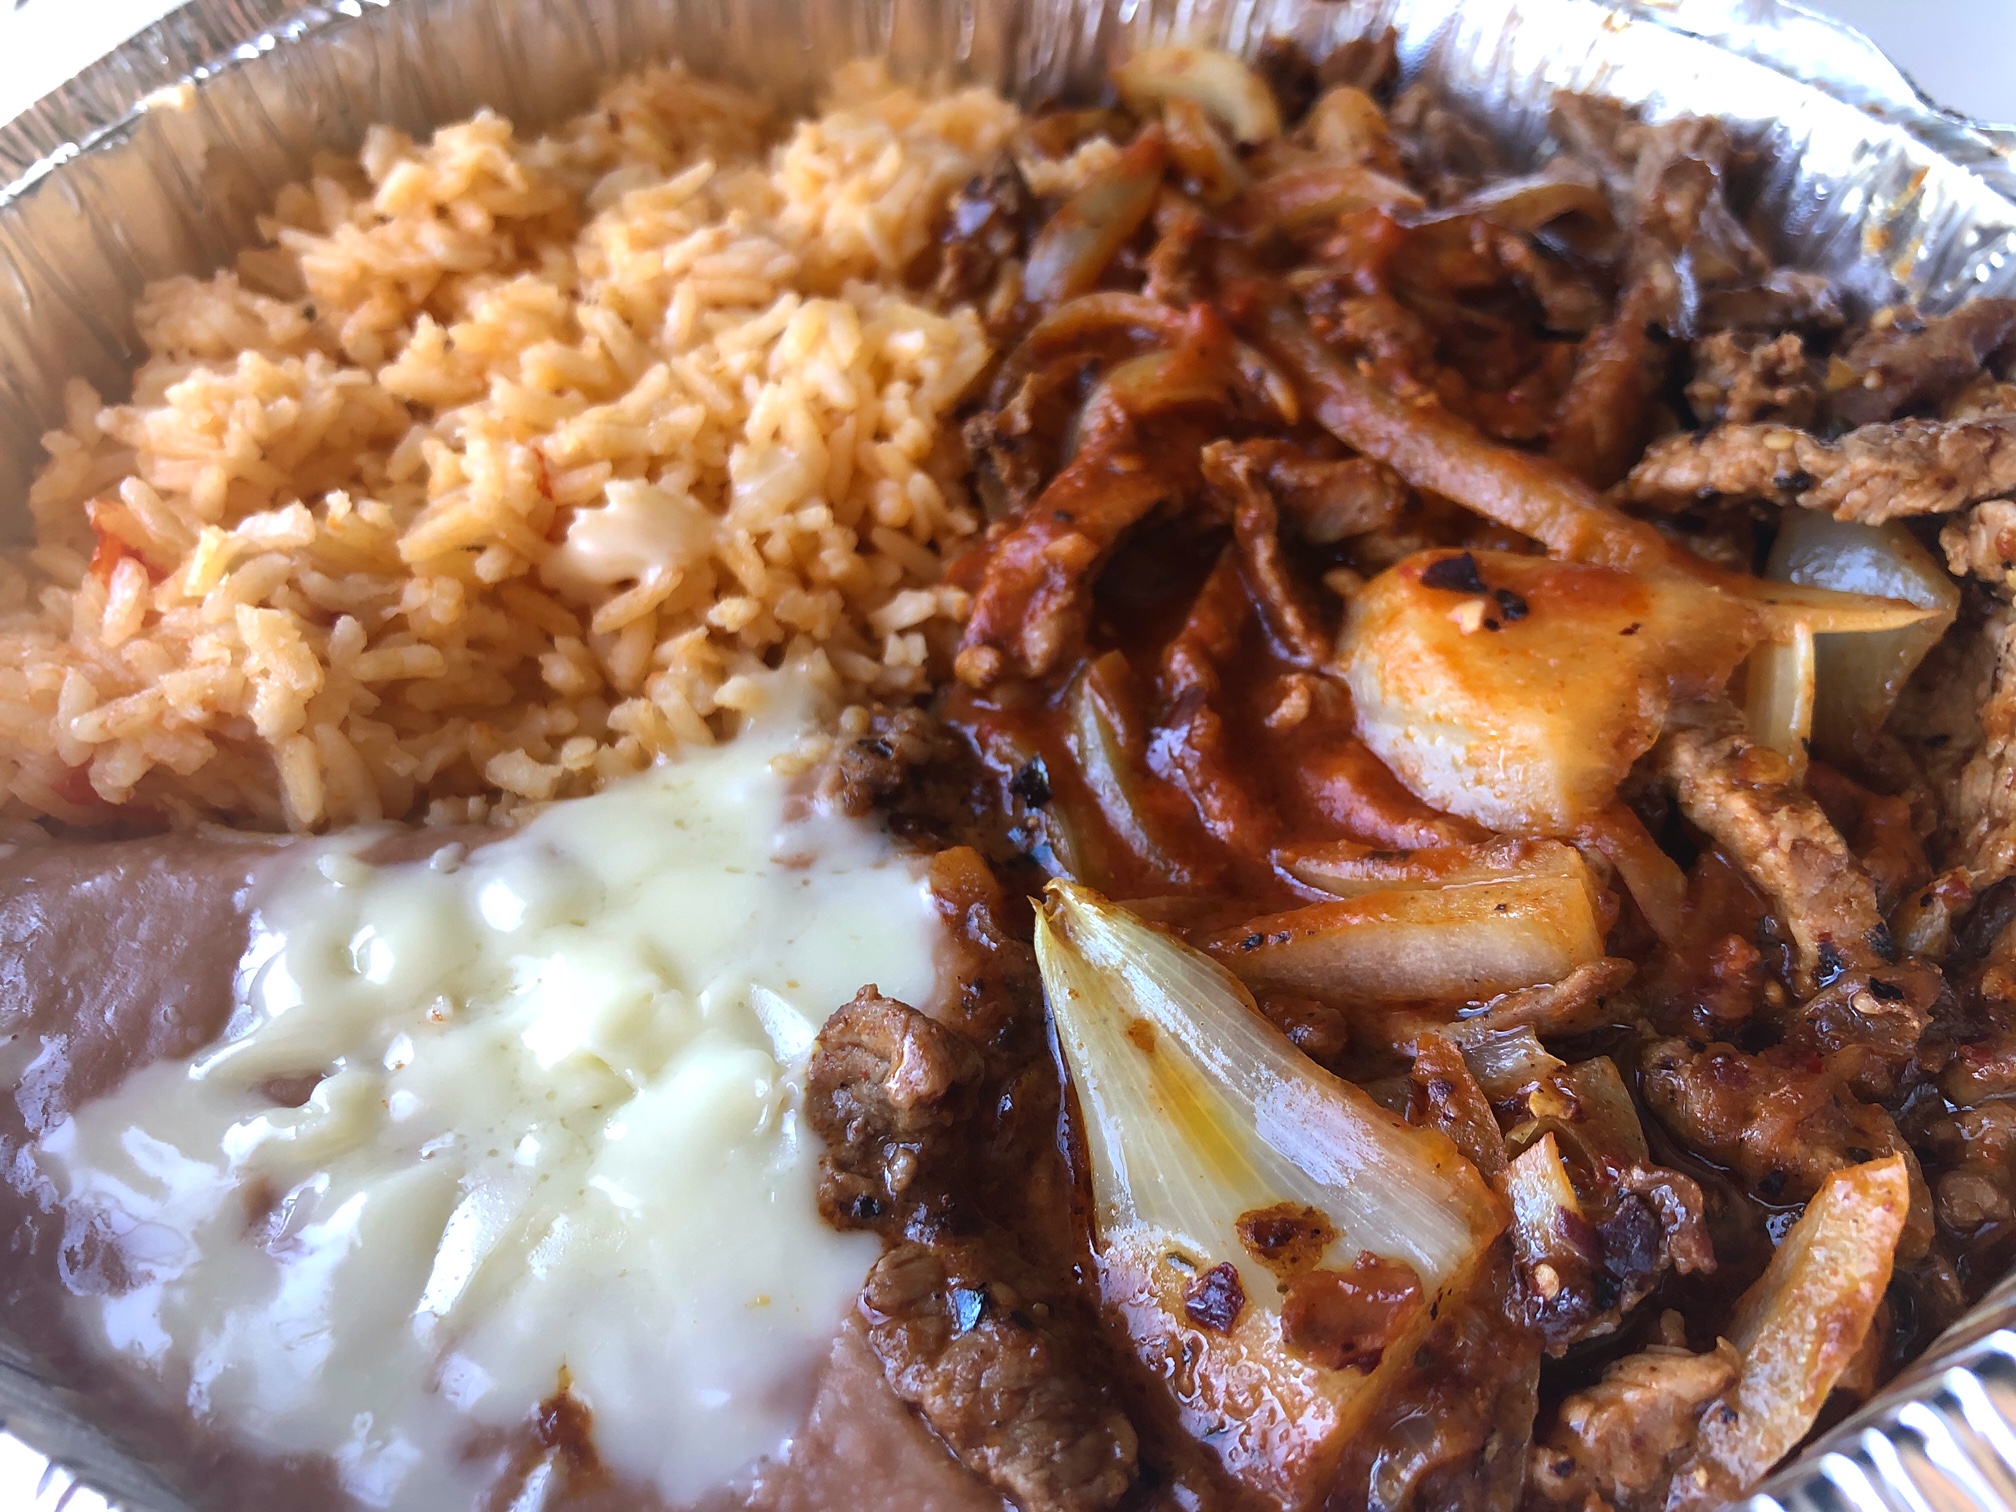 In a tin circular takeout container, there is an ample portion of orange Mexican rice, then a dark red sauce covered beef Chile Colorado, and thin gray pinto beans with white melted cheese on top. Photo by Alyssa Buckley.